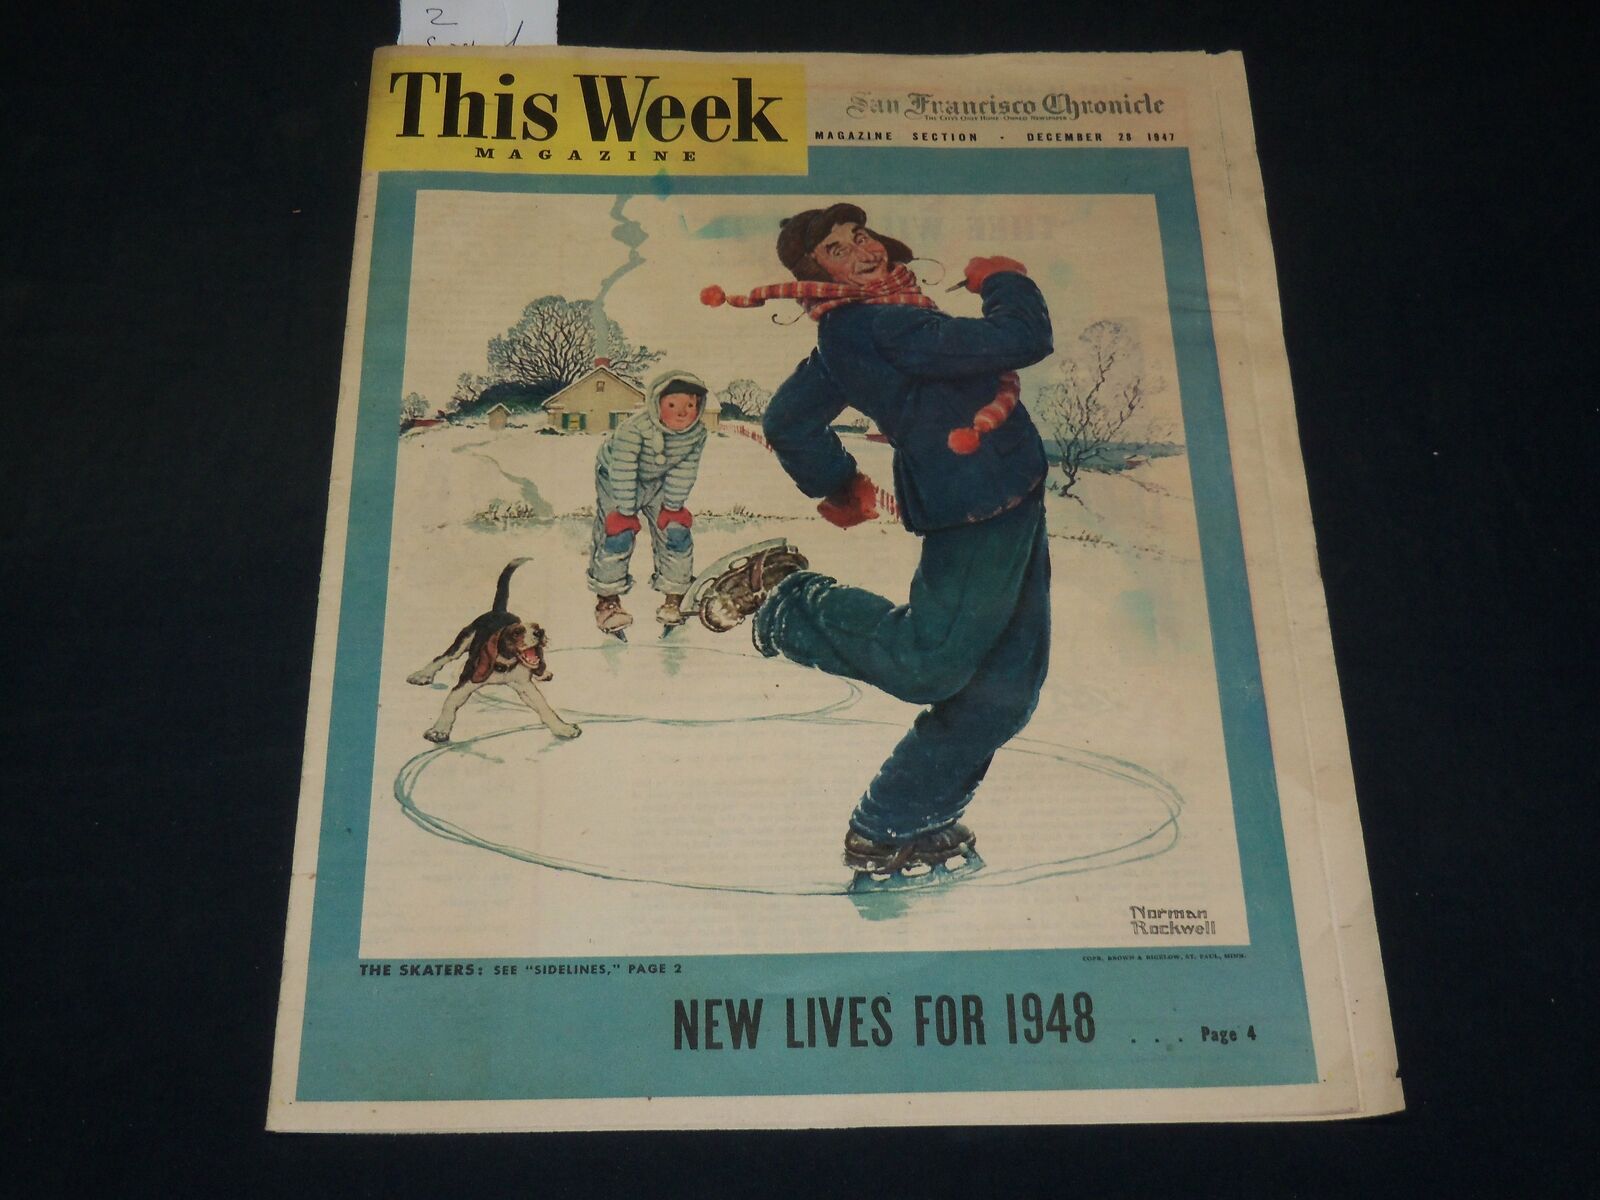 1947 DECEMBER 28 THIS WEEK MAGAZINE SECTION - NORMAN ROCKWELL COVER - NP 2399G